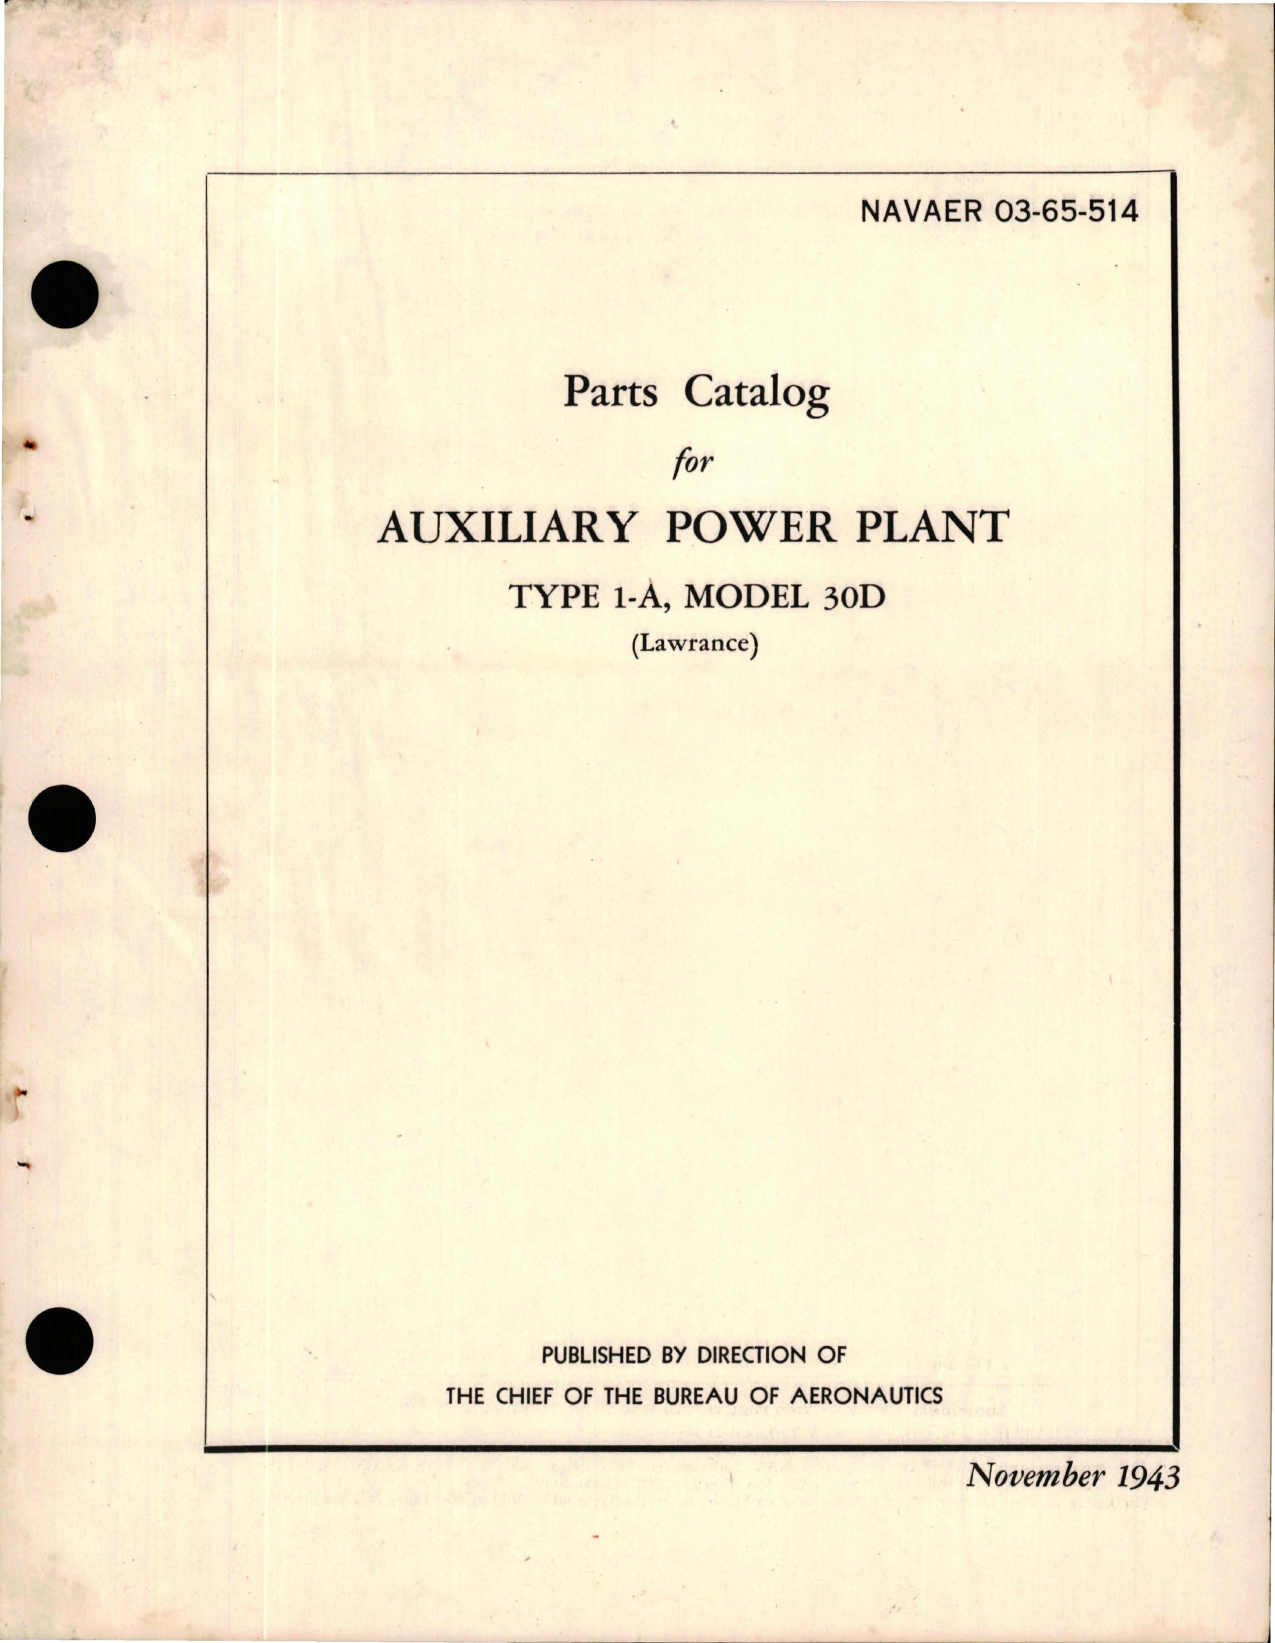 Sample page 1 from AirCorps Library document: Parts Catalog for Auxiliary Power Plant - Type 1-A - Model 30D